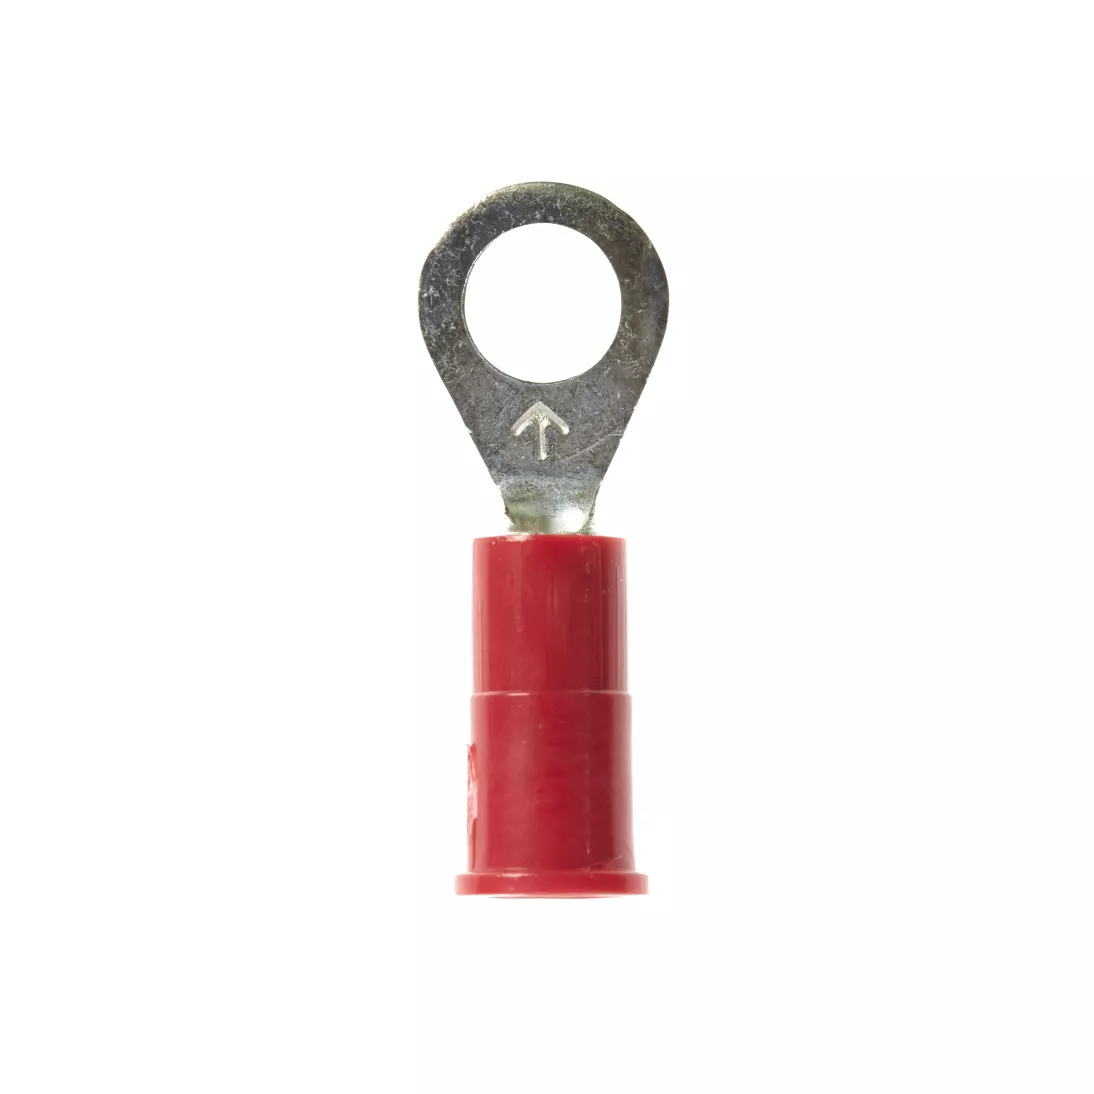 3M™ Scotchlok™ Ring Vinyl Insulated, 100/bottle, MVU18-10RX,
standard-style ring tongue fits around the stud, 500/Case